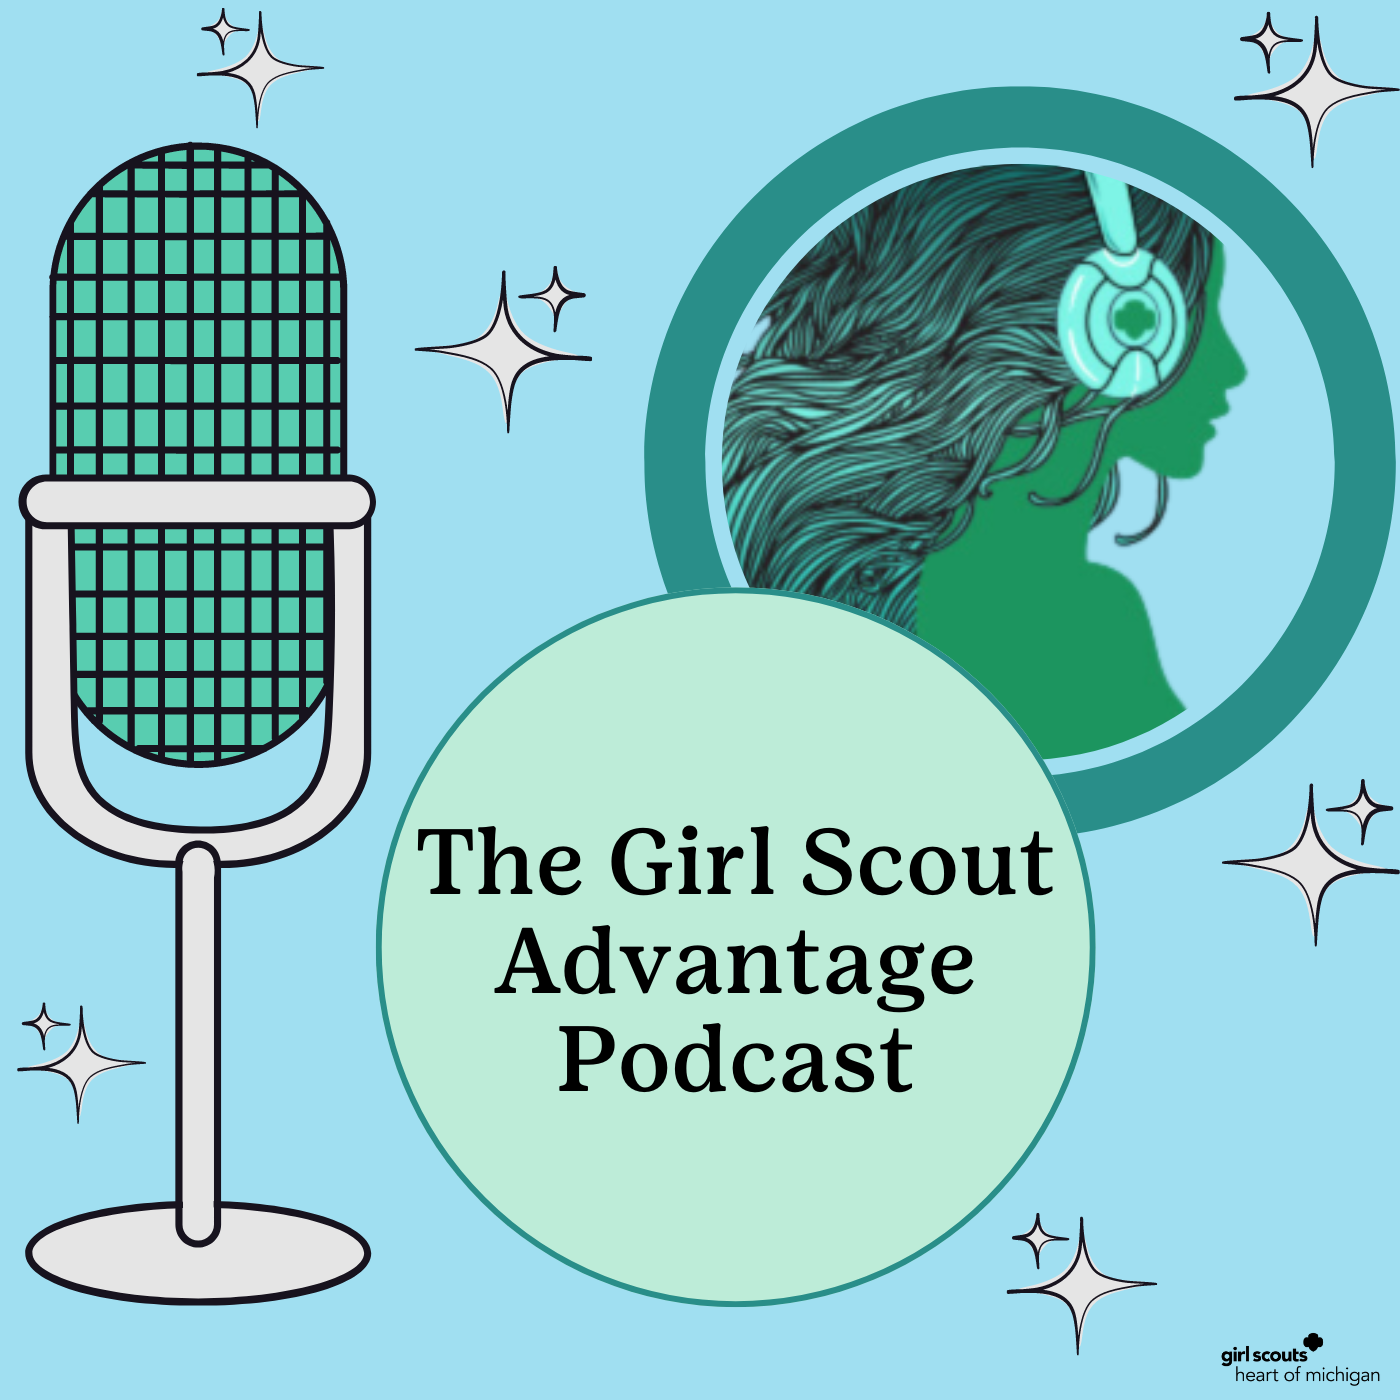 The Girl Scout Advantage Podcast